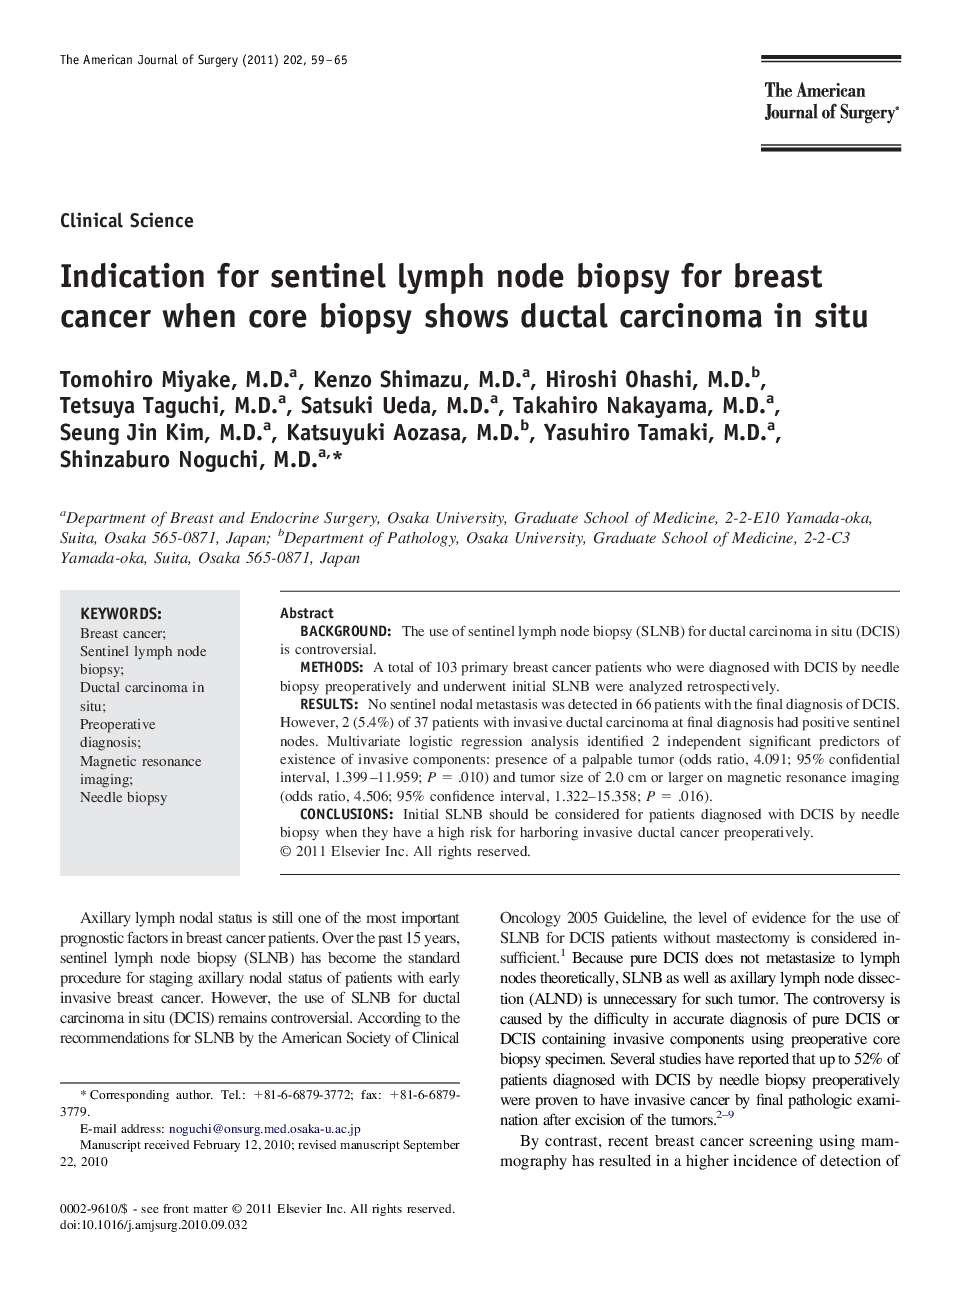 Indication for sentinel lymph node biopsy for breast cancer when core biopsy shows ductal carcinoma in situ